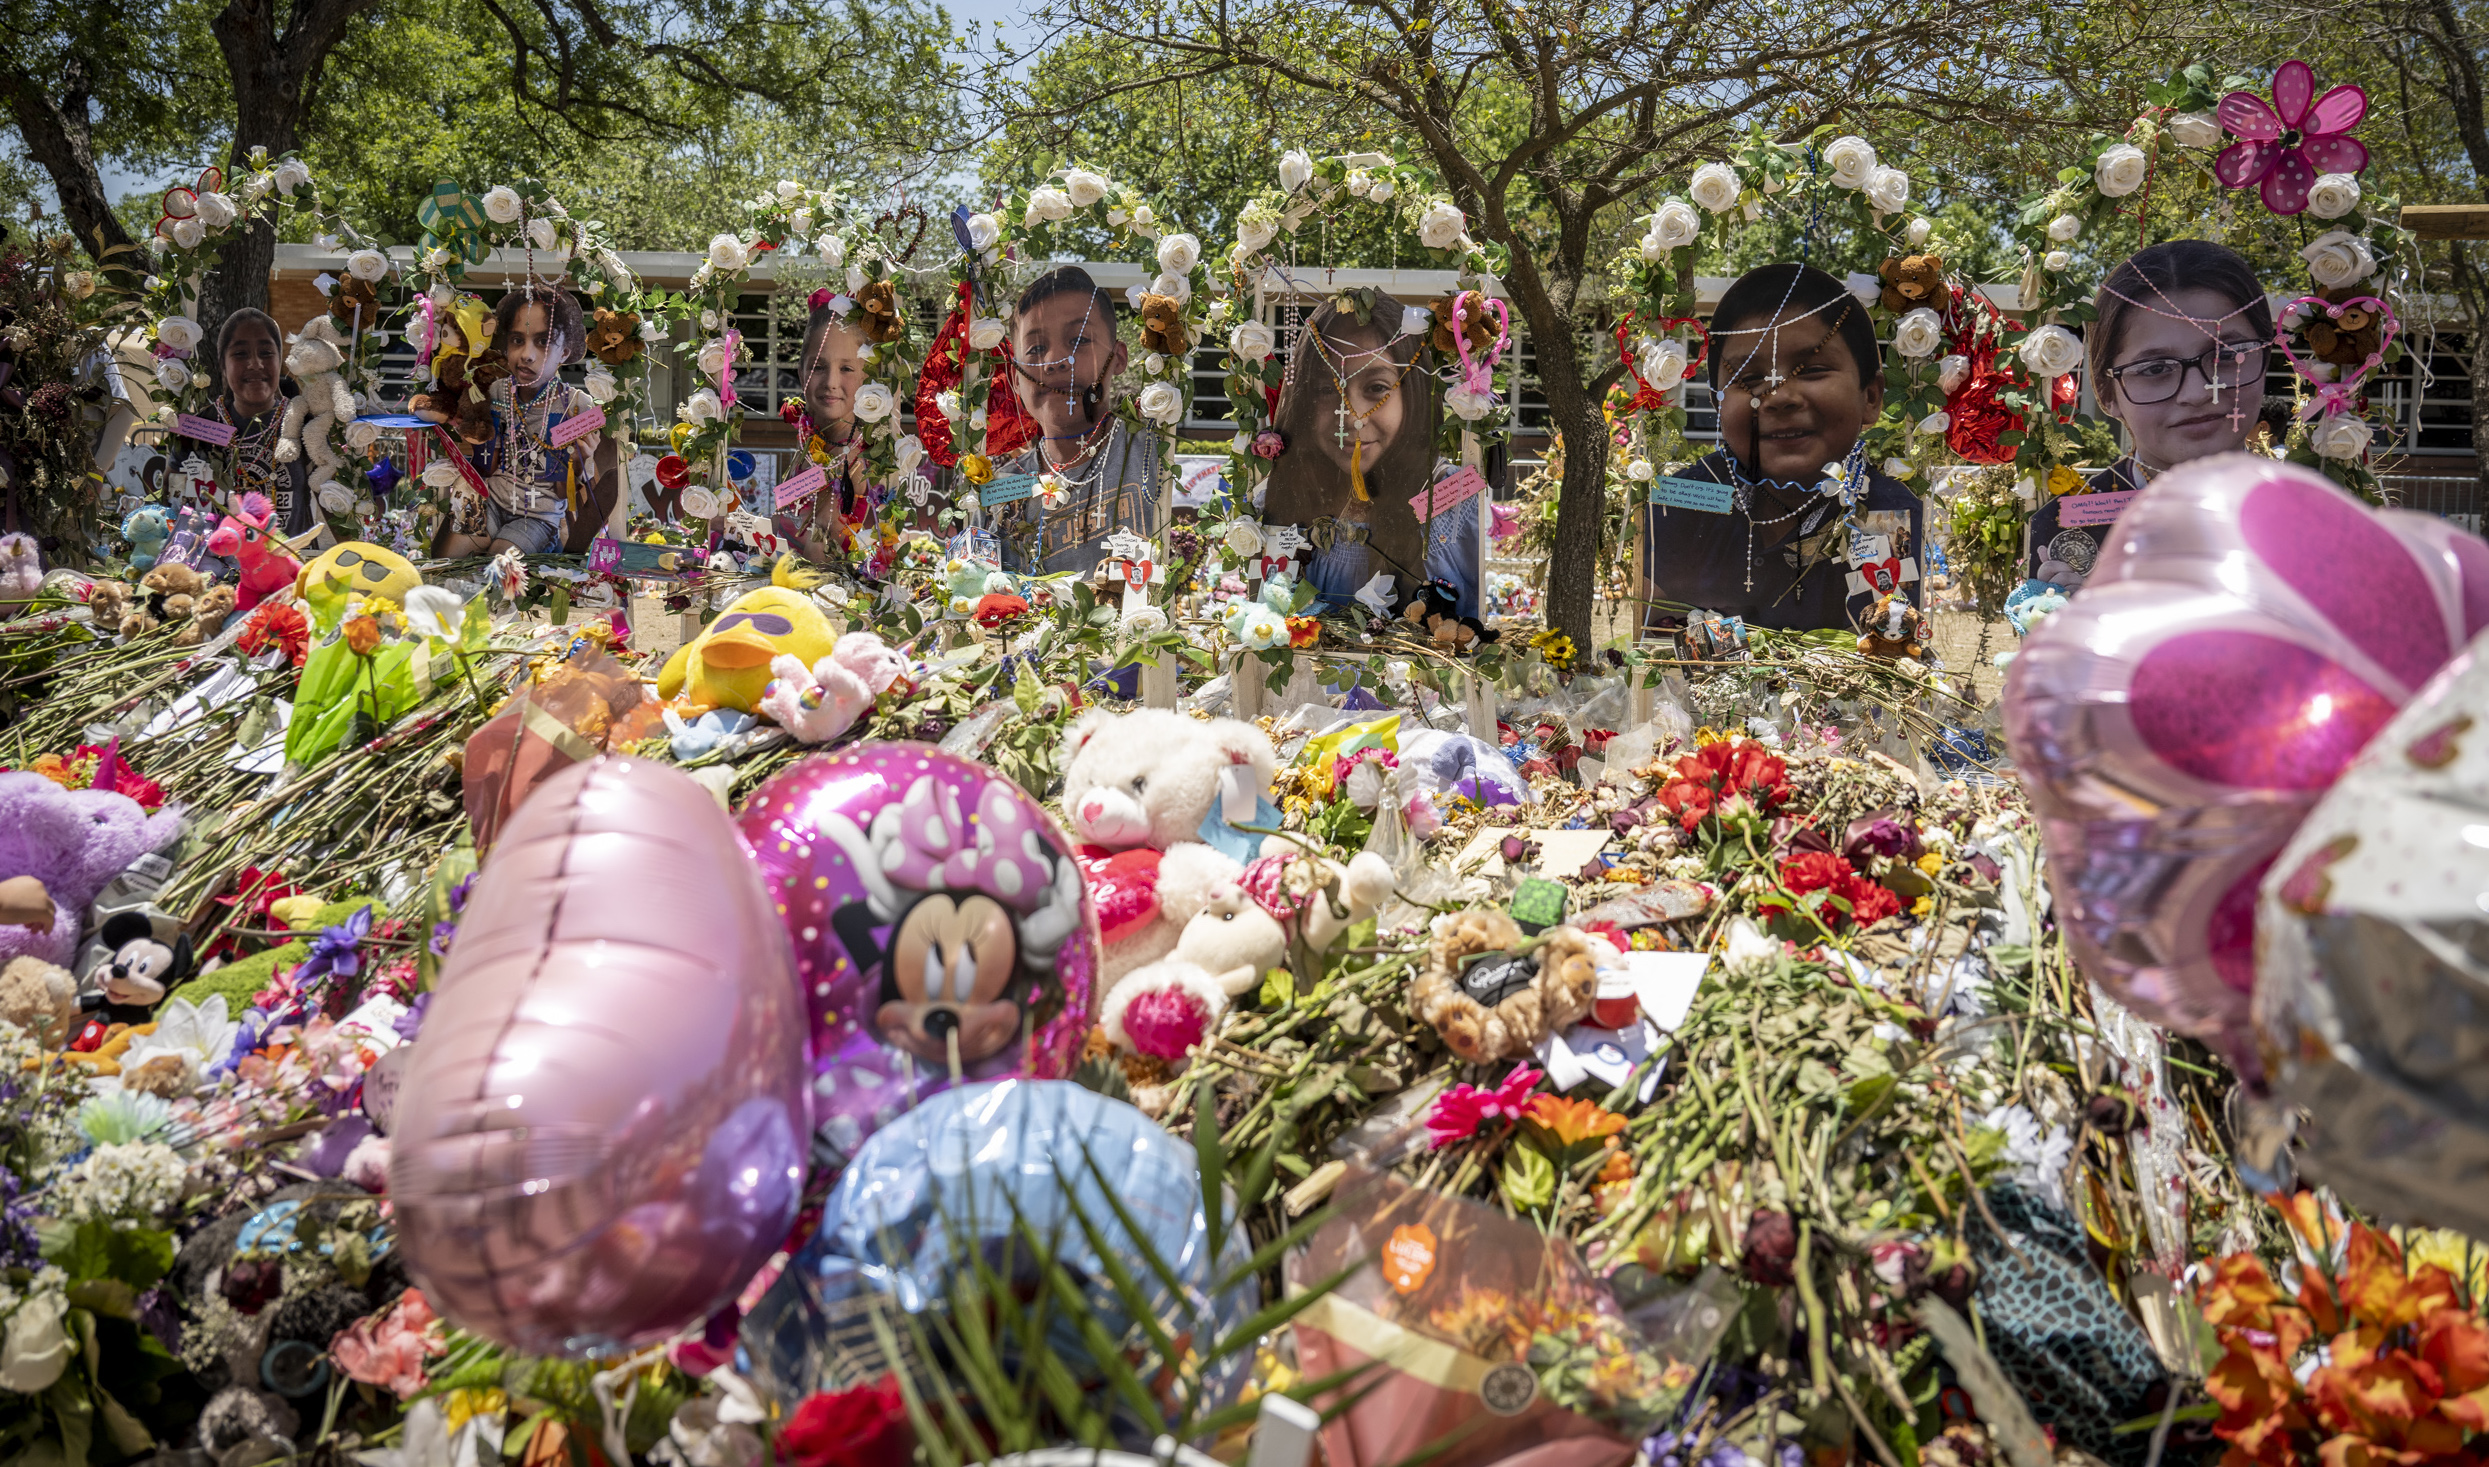 Uvalde, TX (June 6, 2022) DHS Secretary Alejandro Mayorkas visits Robb Elementary School, the site of a recent mass shooting where 21 people (19 students and 2 teachers) lost their lives. While there, the secretary laid a bouquet of flowers at the memorial site located at the school. (DHS Photo by Benjamin Applebaum)